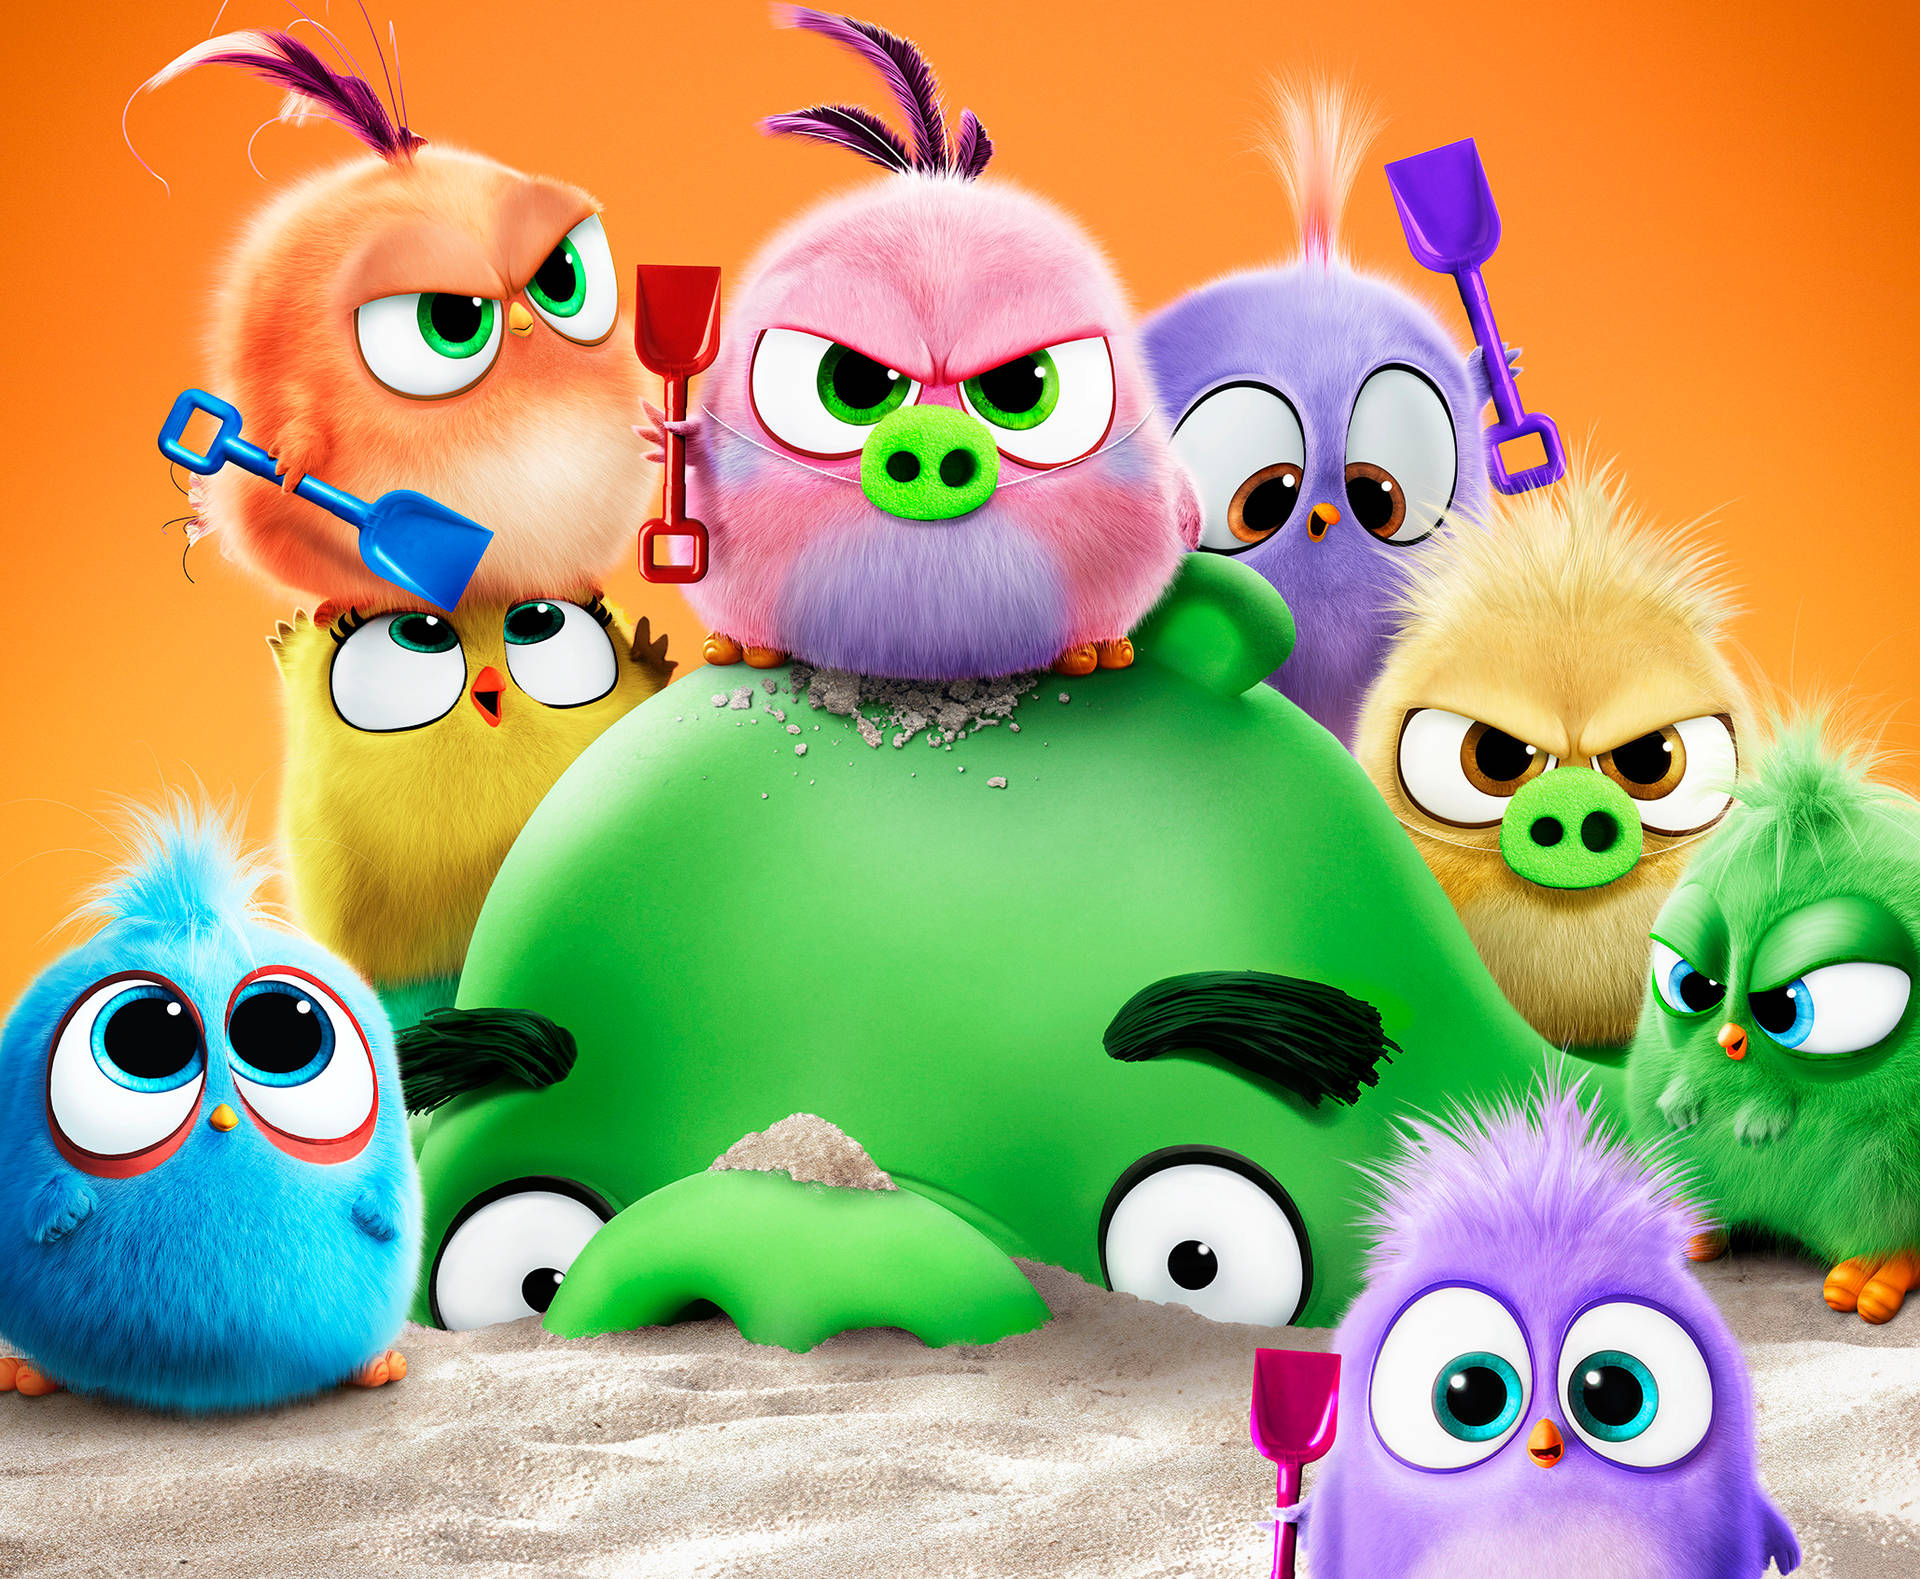 The Angry Birds Movie 2 Battle Ready Wallpaper